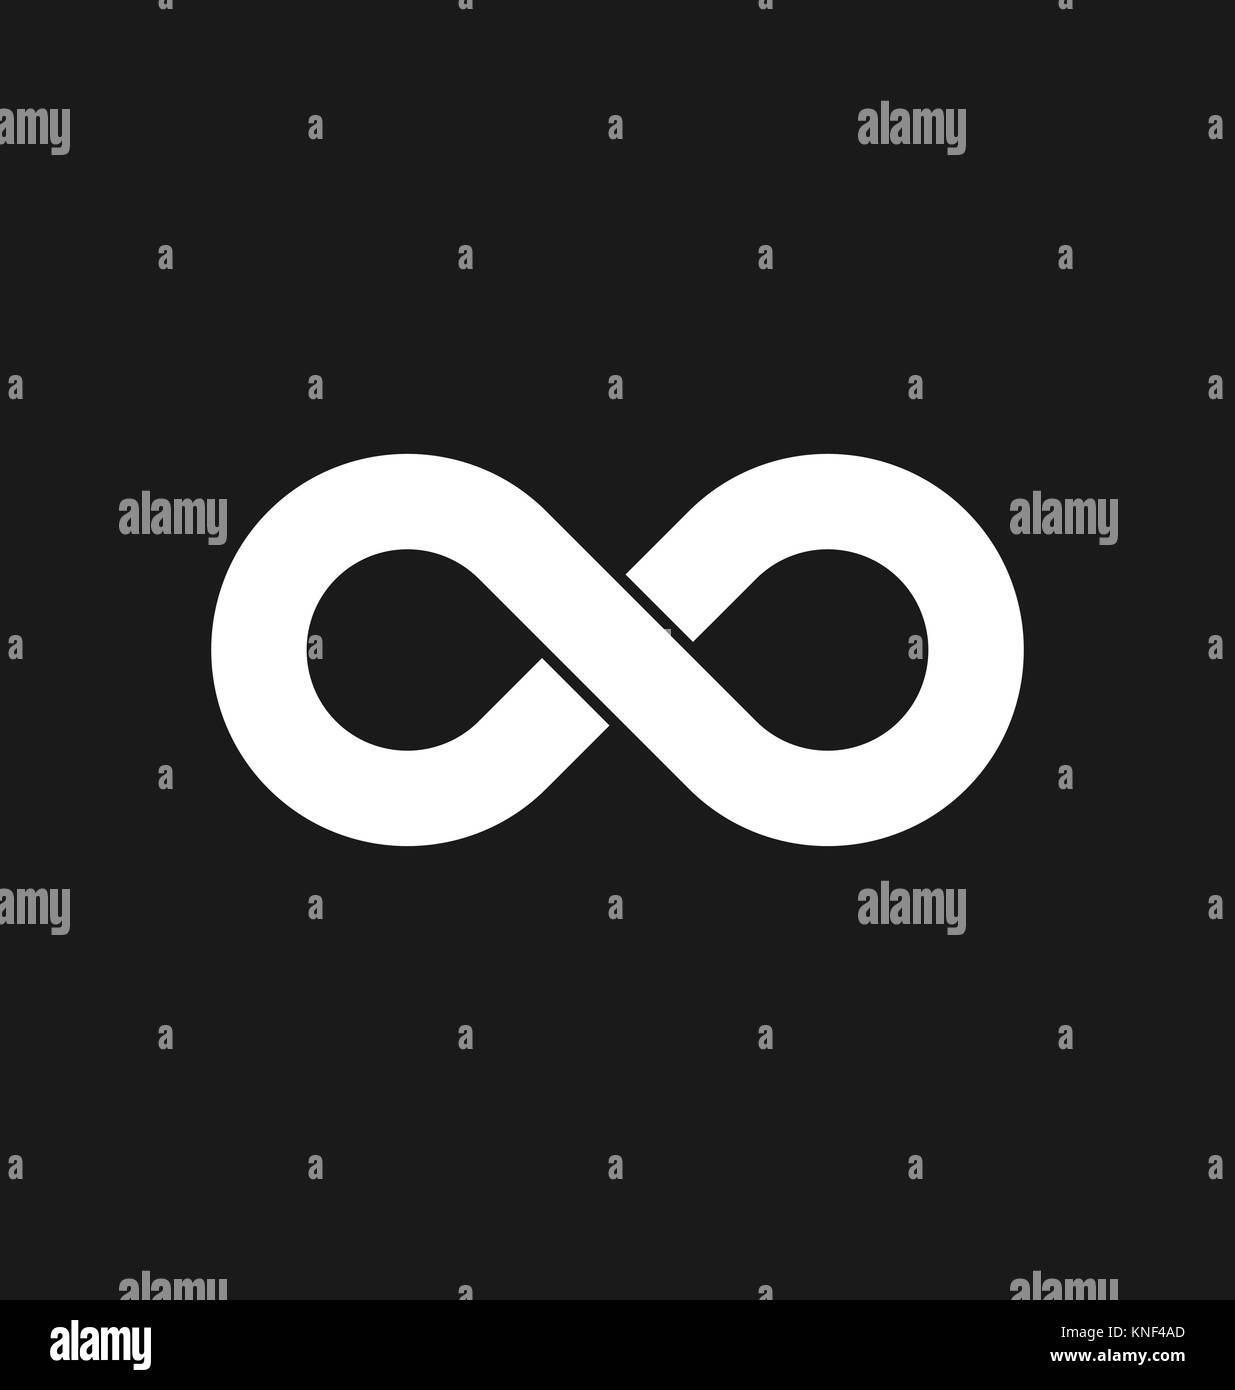 Infinity symbol icons vector illustration. Unlimited, limitless symbol, sign. Stock Vector